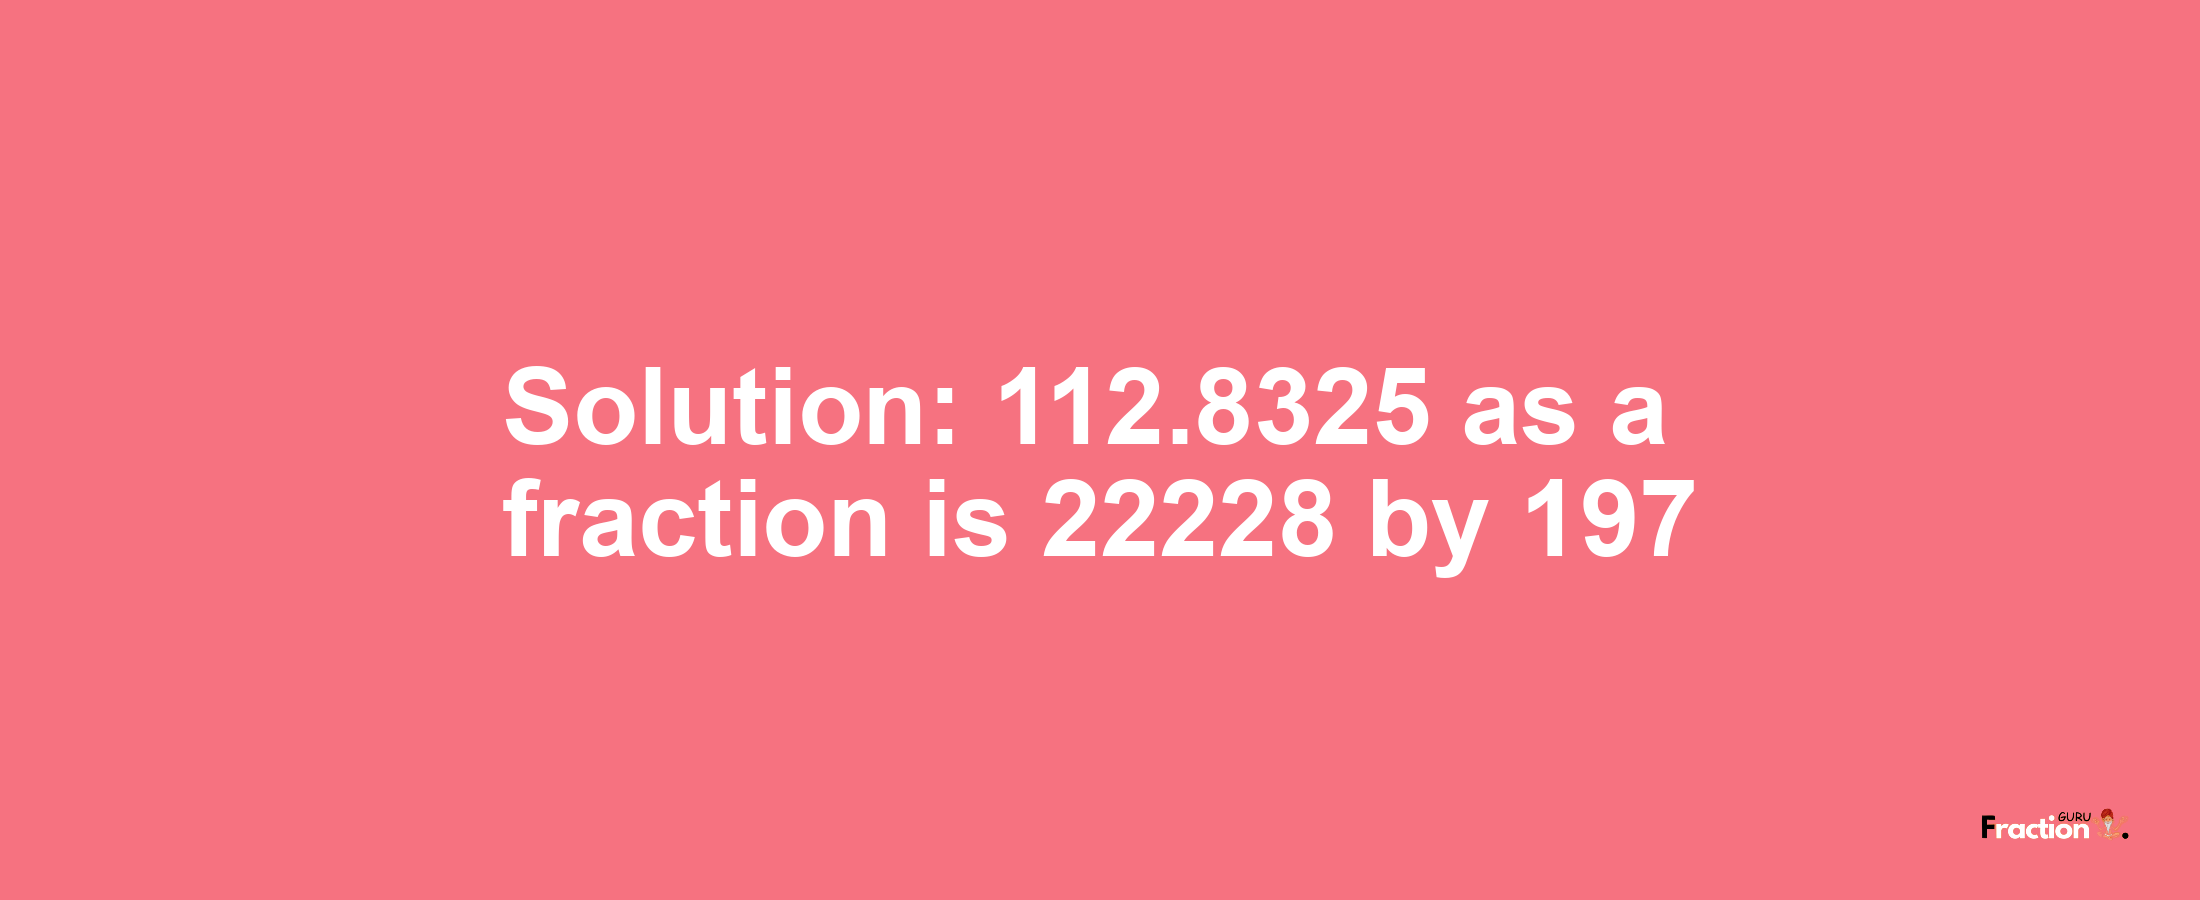 Solution:112.8325 as a fraction is 22228/197